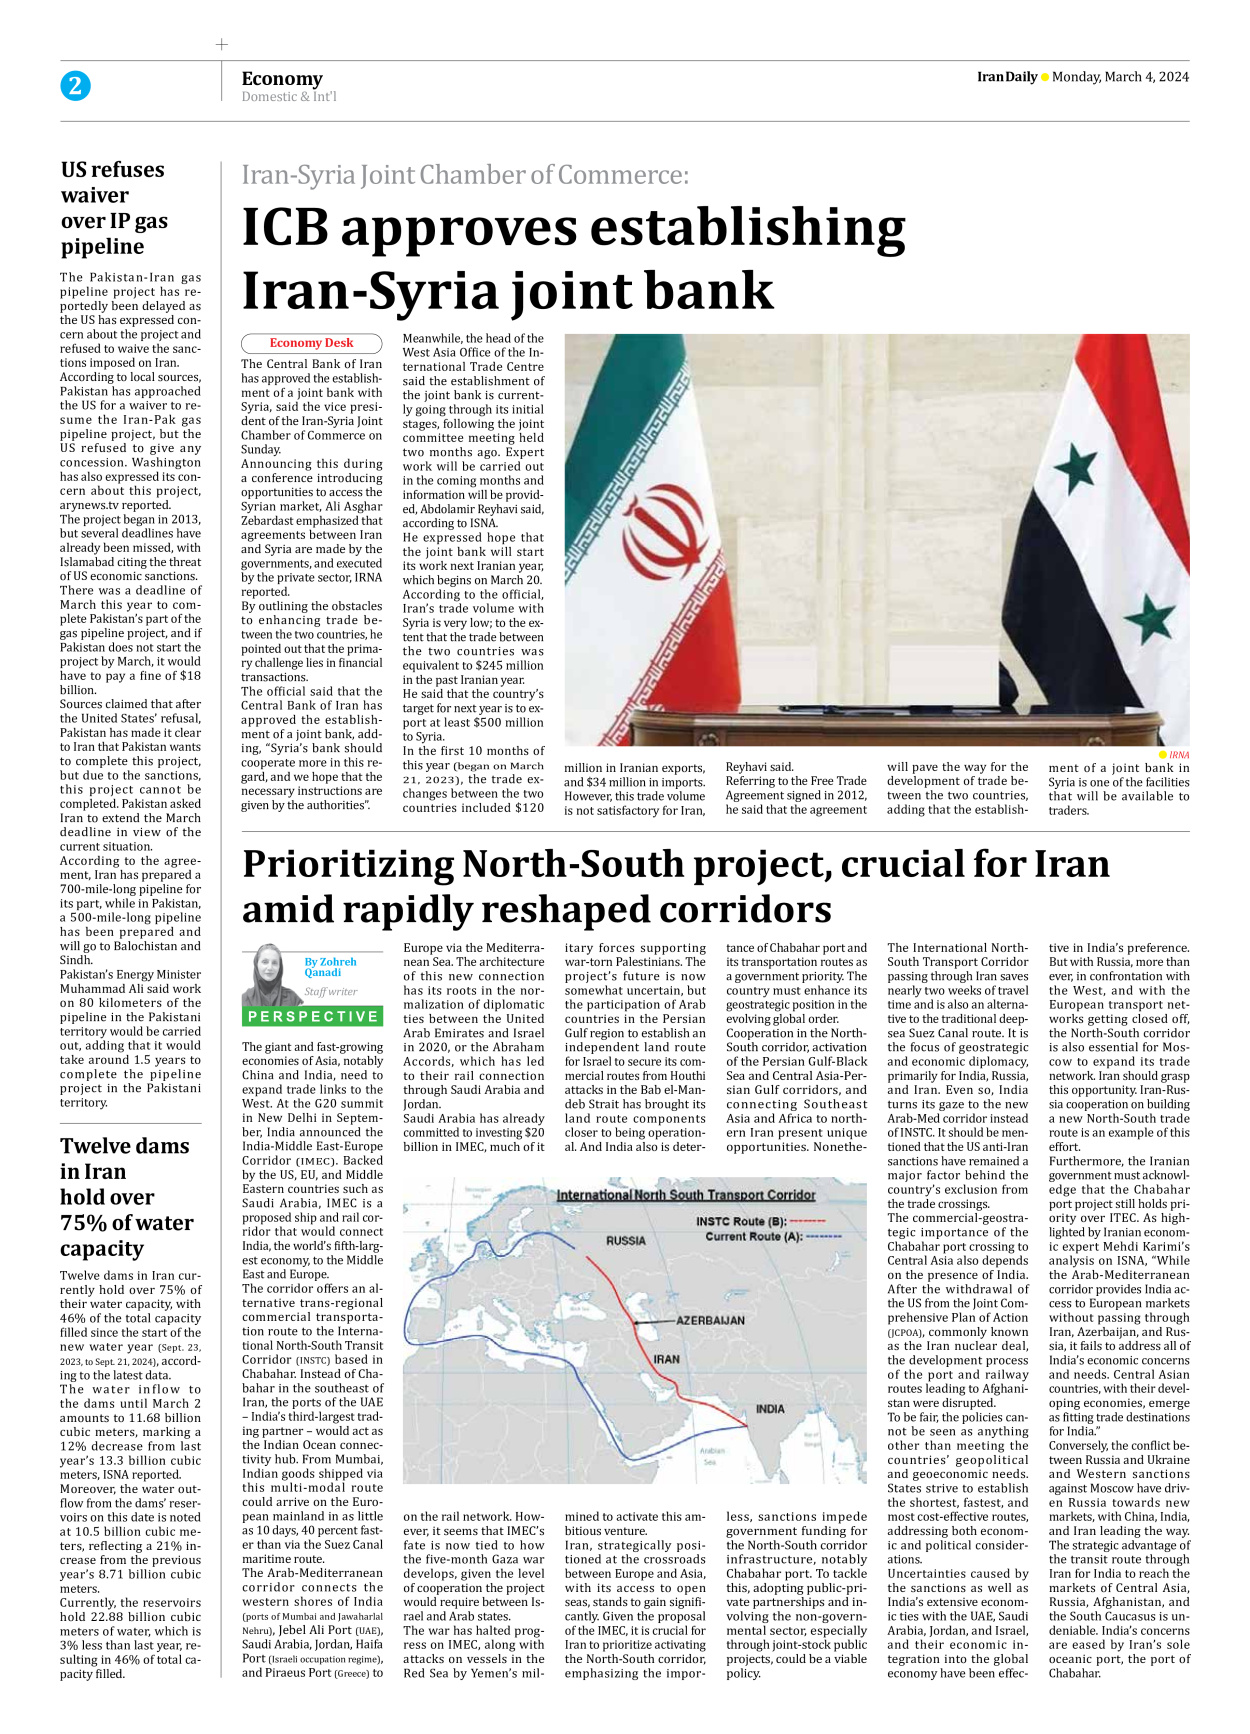 Iran Daily - Number Seven Thousand Five Hundred and Twenty One - 04 March 2024 - Page 2